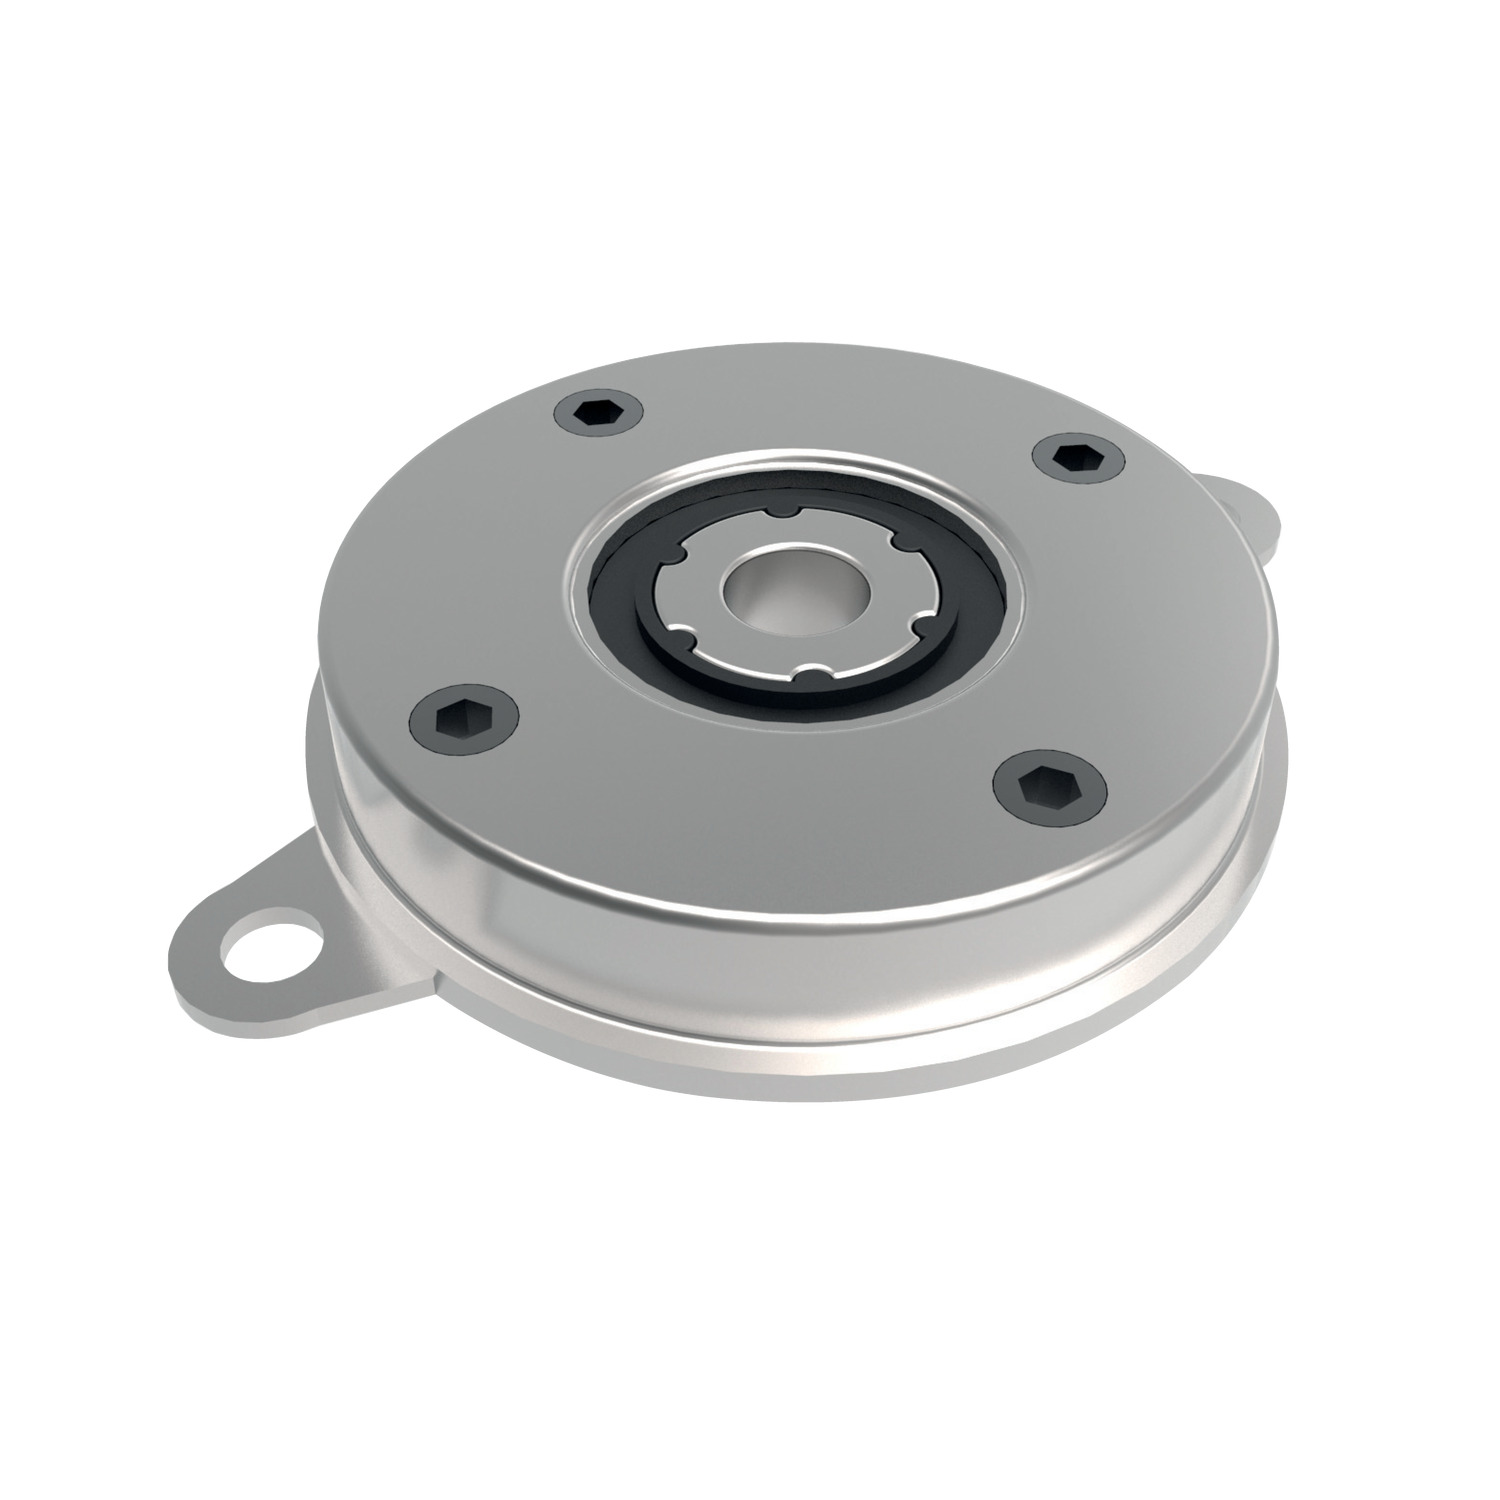 Q3240.AC0150 Disk Dampers, 5.0Nm With Gear, Counter Clockwise